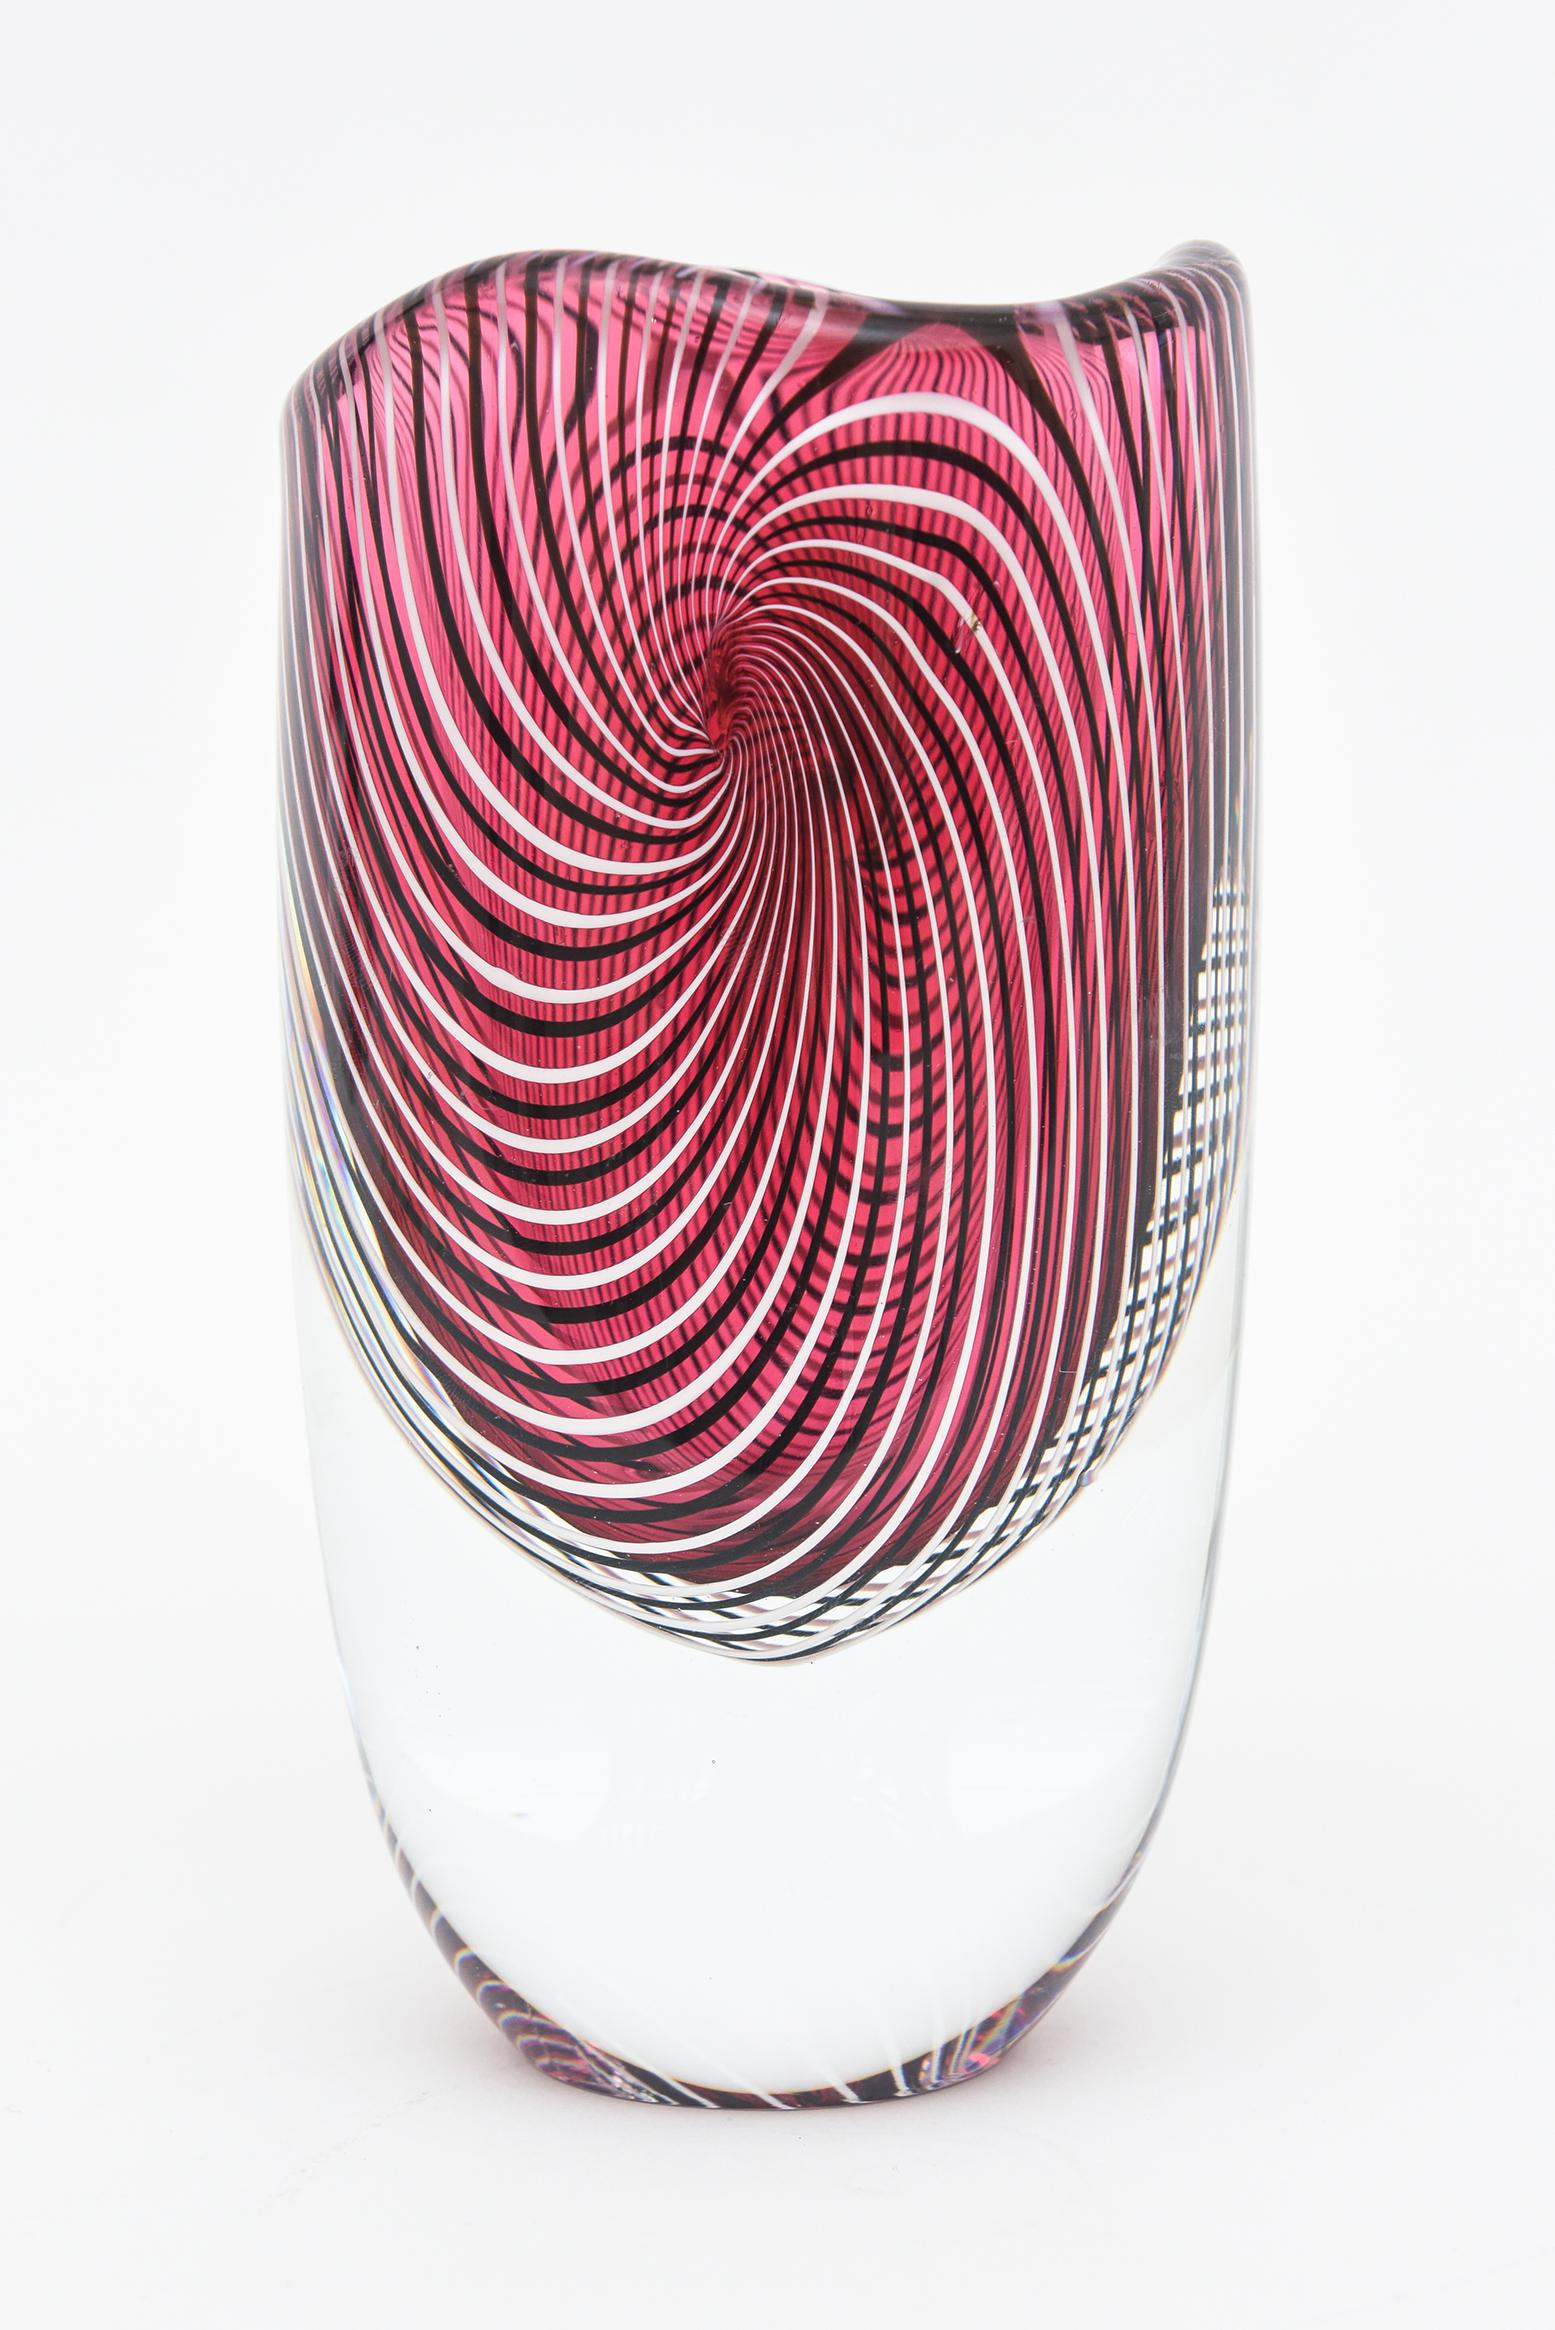 Vintage Murano Seguso Spiral Optic Striped Deep Pink And White Vase or Vessel For Sale 1